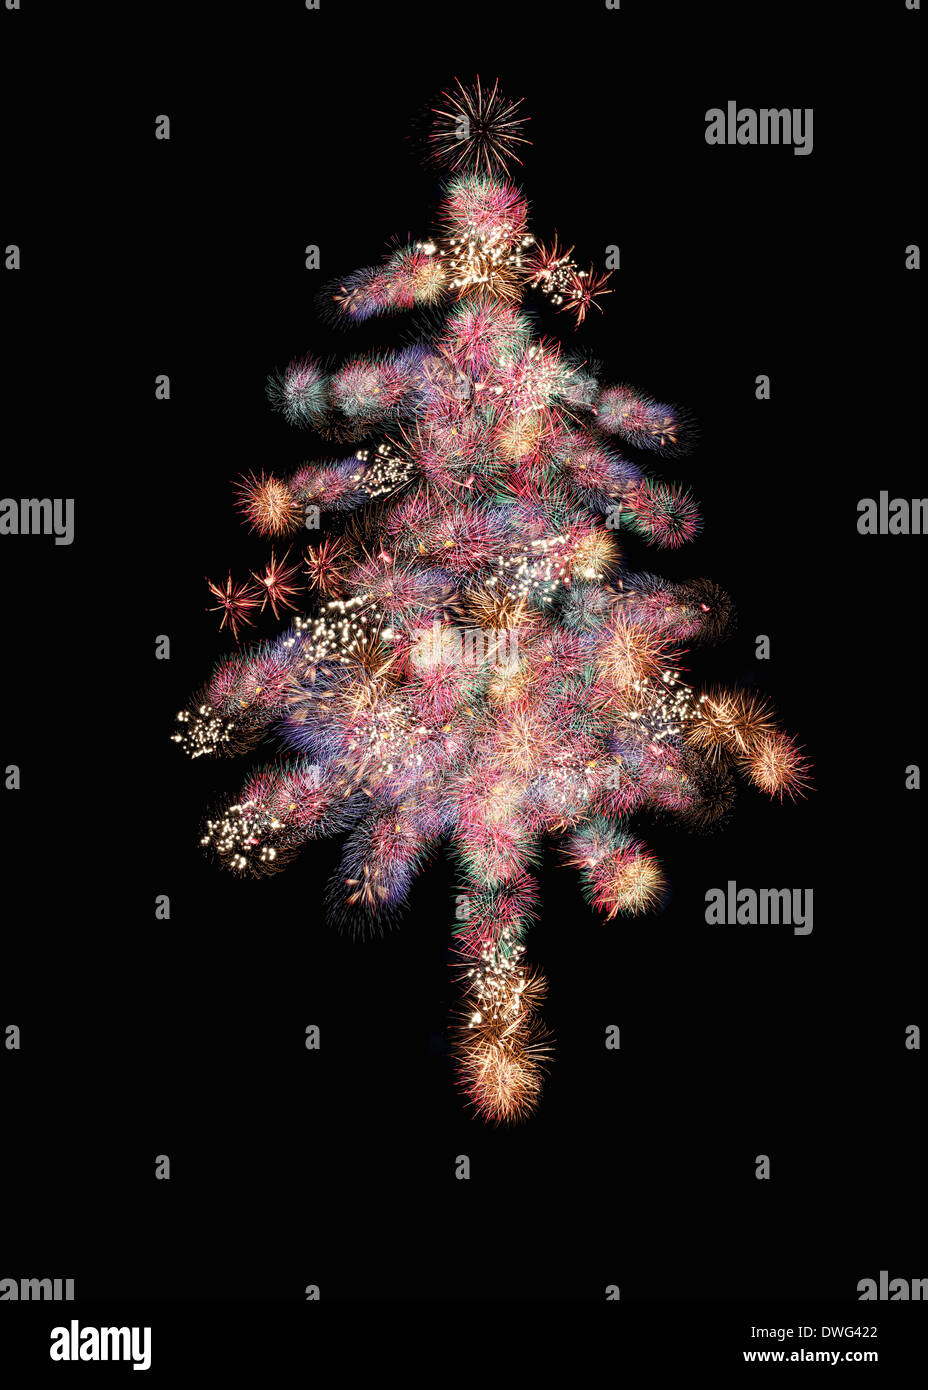 Christmas Tree of Fireworks or firecracker in the darkness. Stock Photo